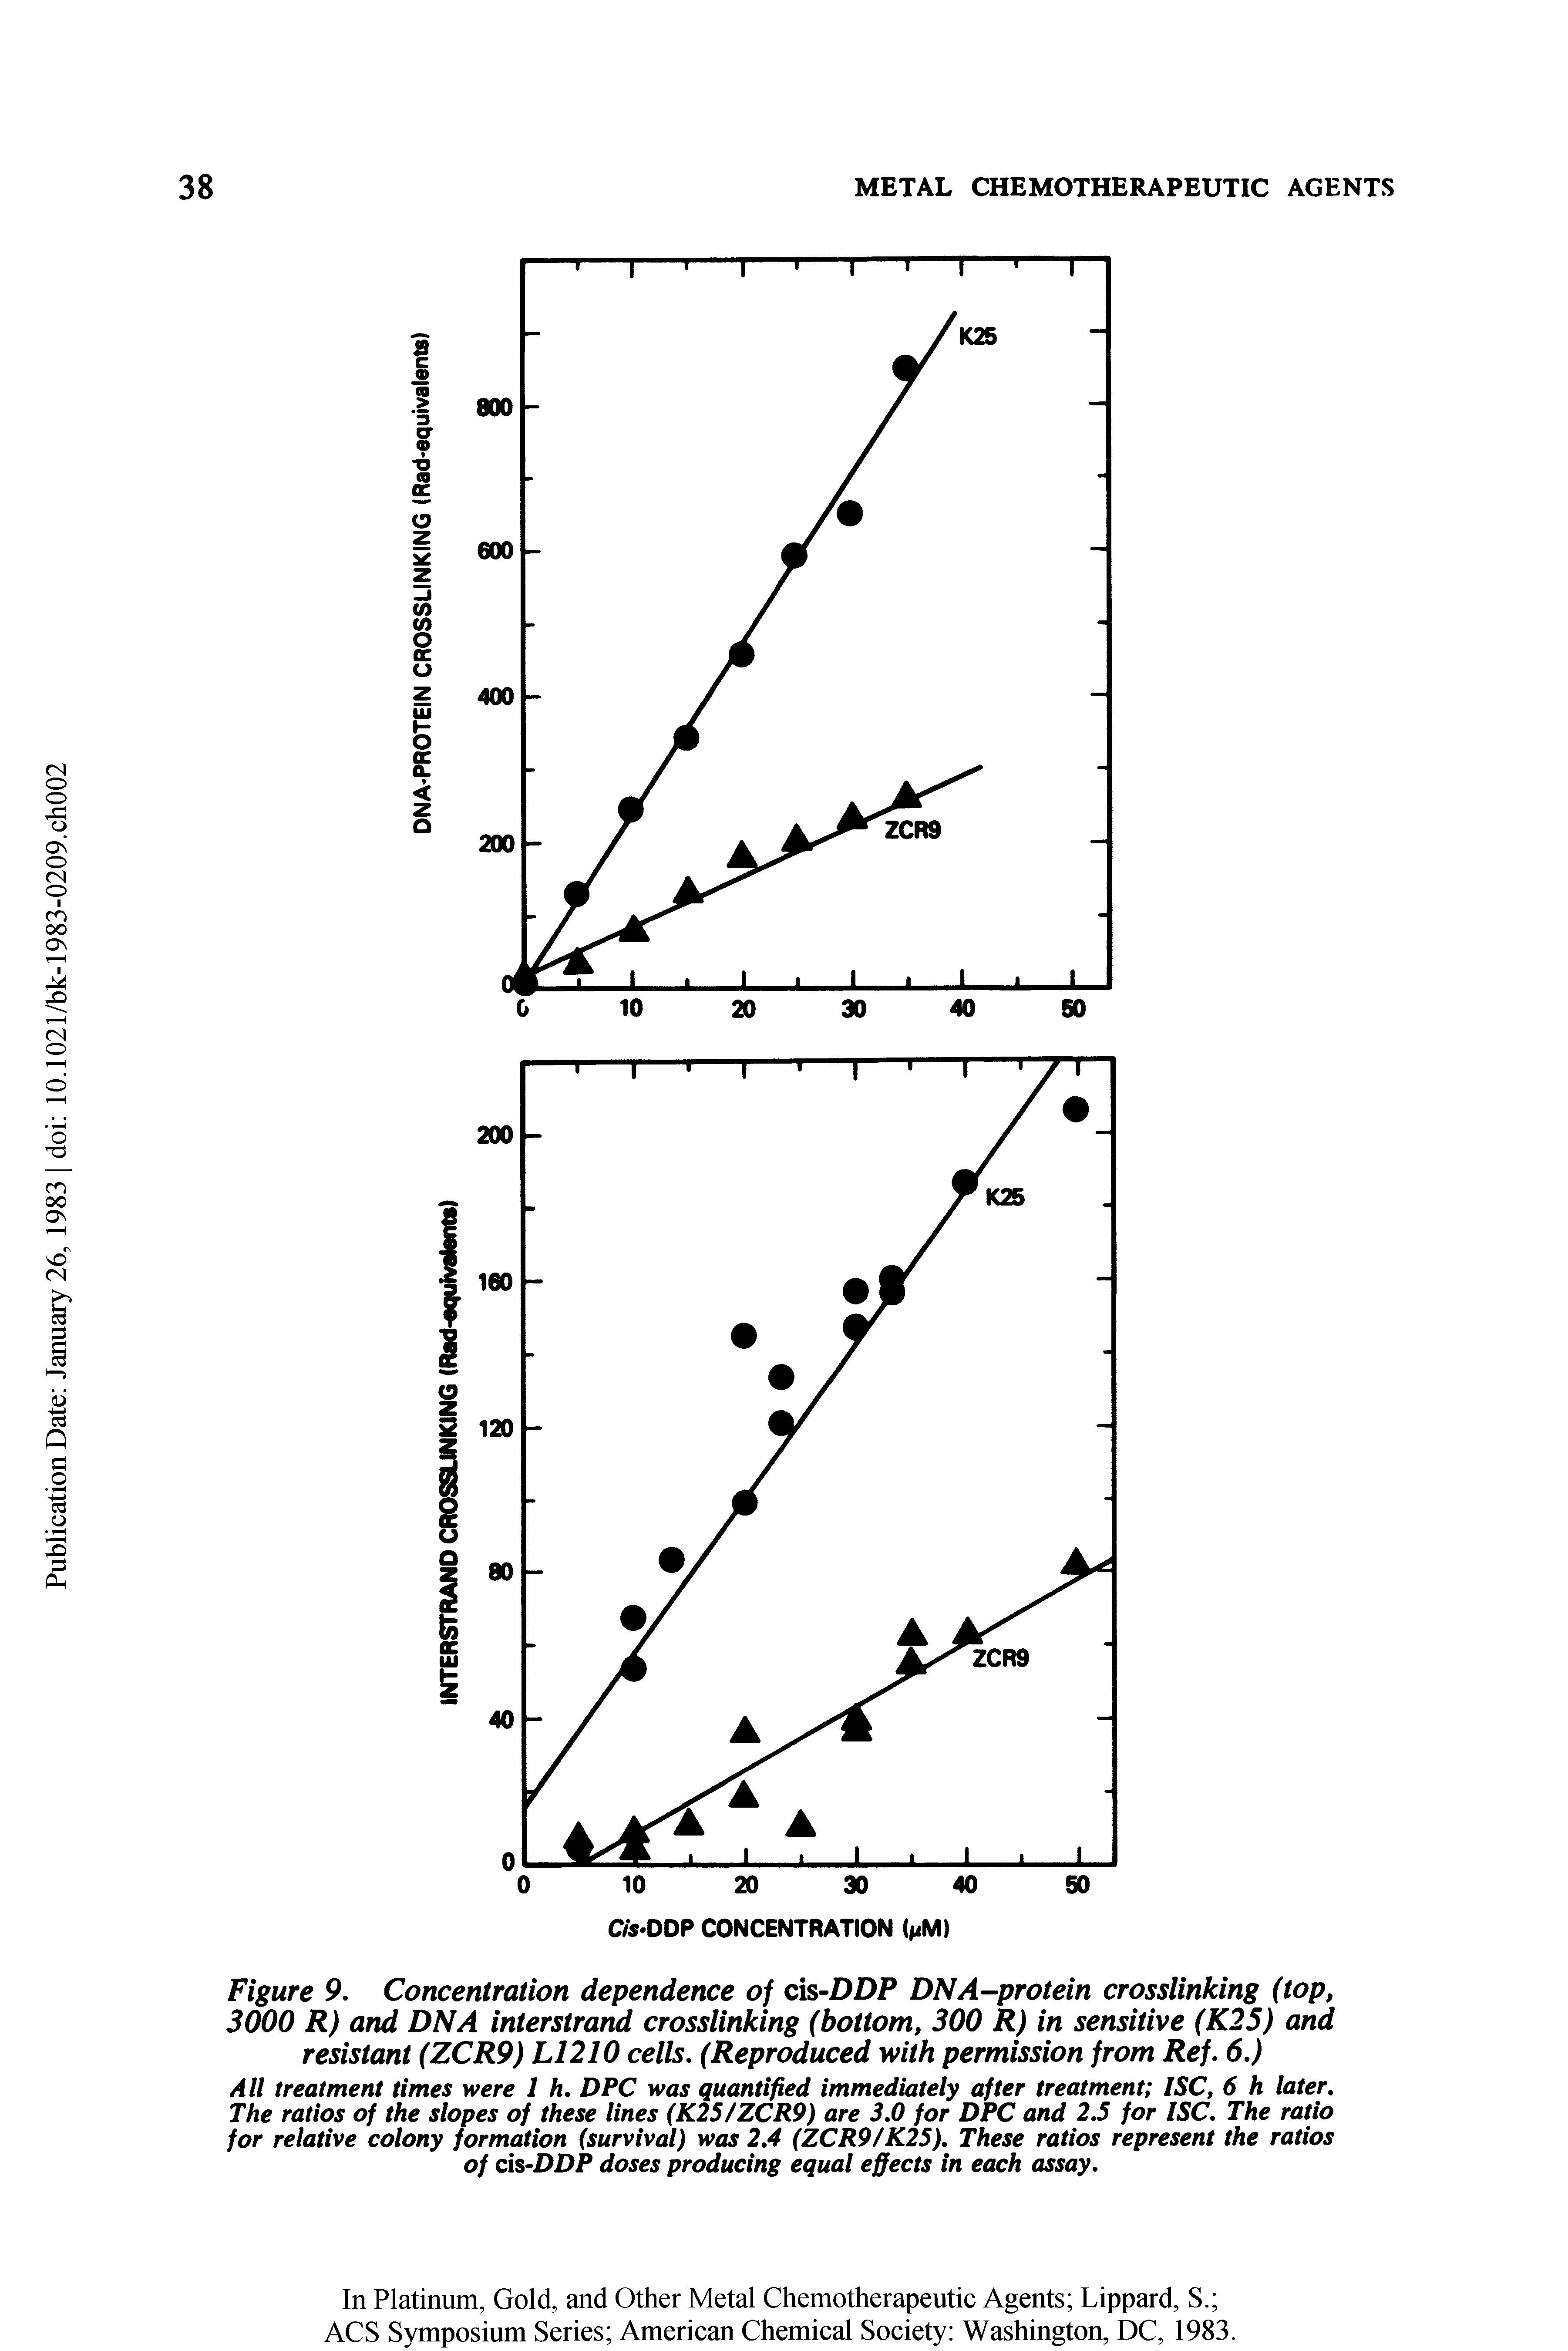 Figure 9. Concentration dependence of cis-DDP DNA-protein crosslinking (top, 3000 R) and DNA interstrand crosslinking (bottom, 300 R) in sensitive (K25) and resistant (ZCR9) L1210 cells. (Reproduced with permission from Ref. 6.)...